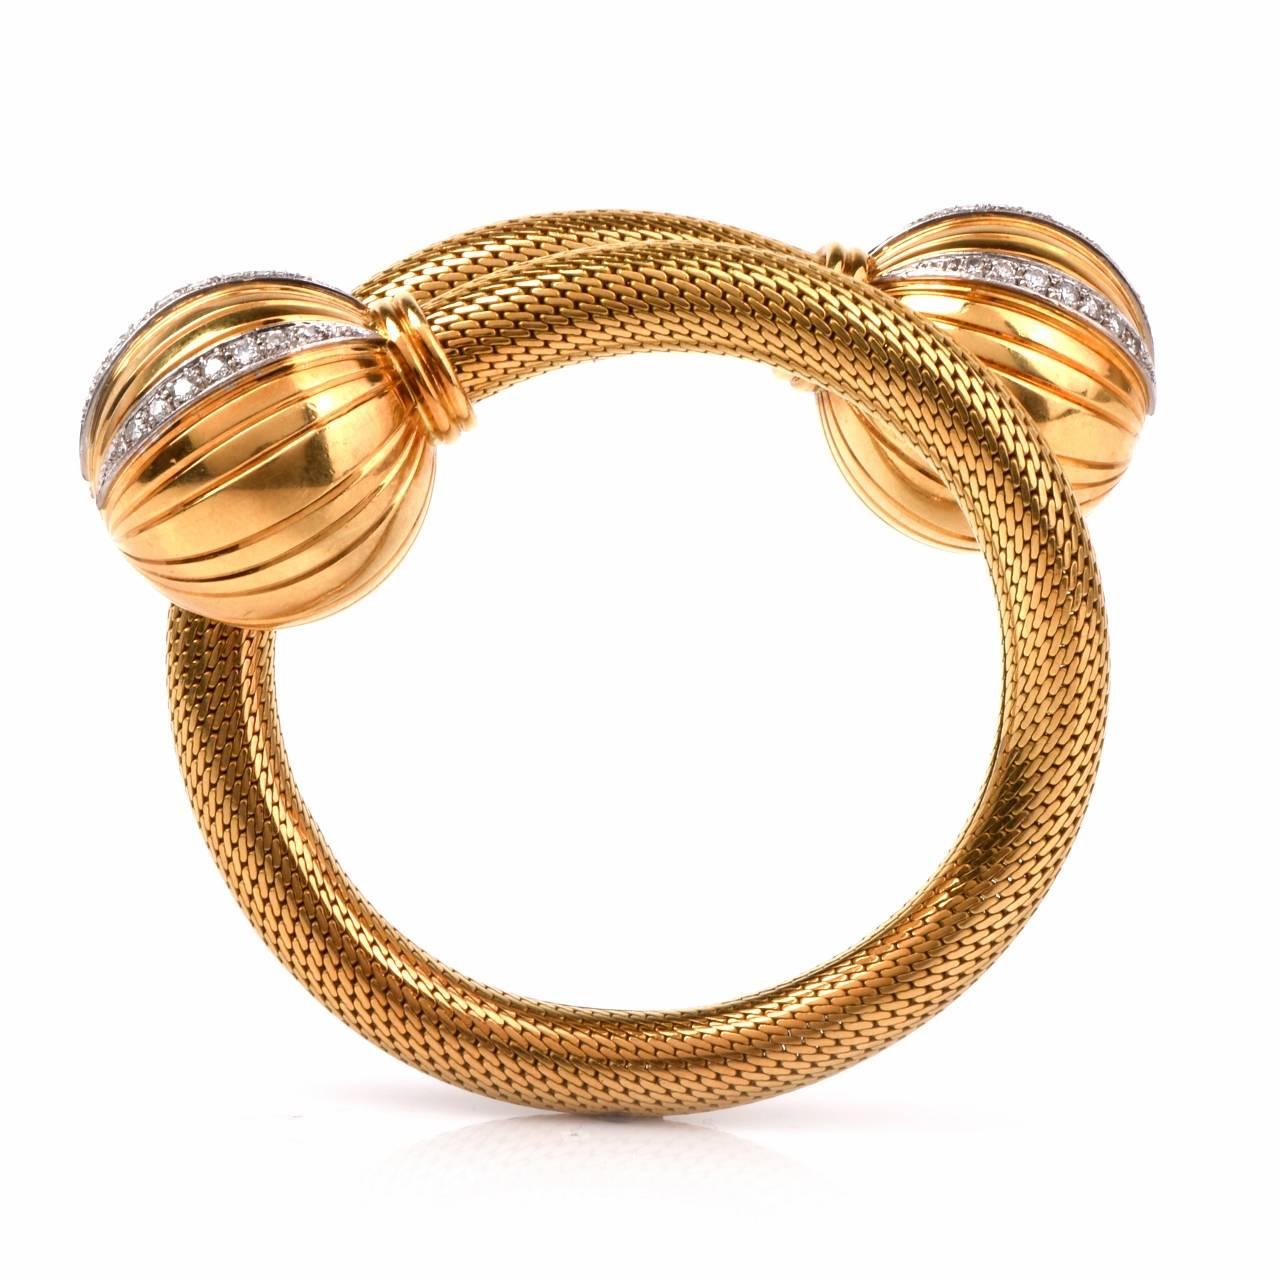 This Vintage Retro cuff bracelet of flexible construction is rendered in solid 18K , textured yellow gold. Designed as a snake pattern bracelet , it is expandable from 6 1/2